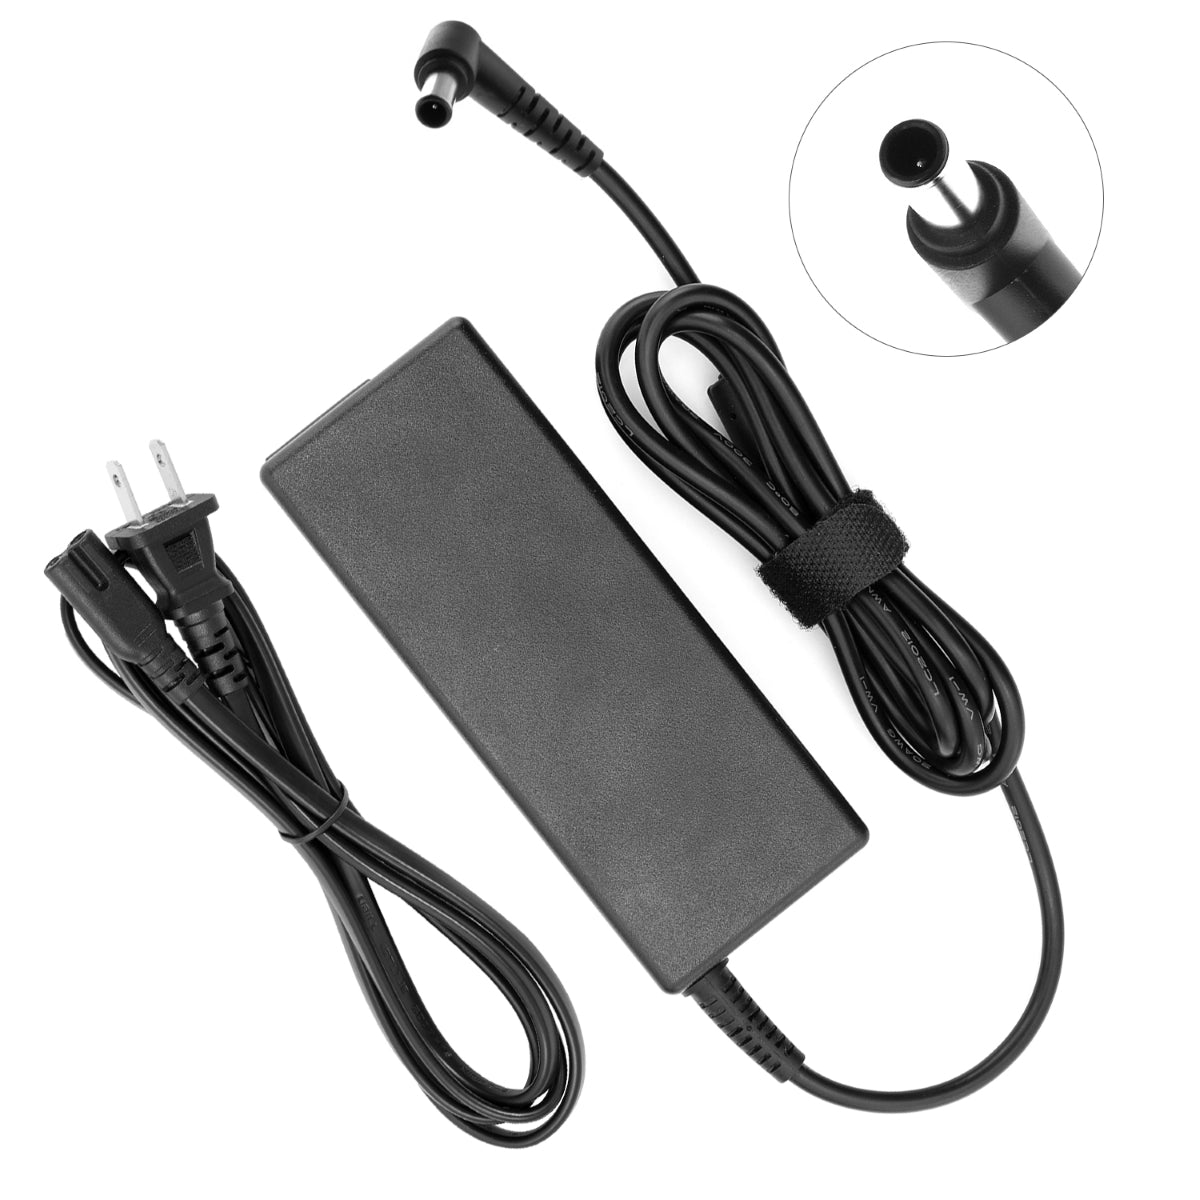 AC Adapter for LG 19EN33T Monitor